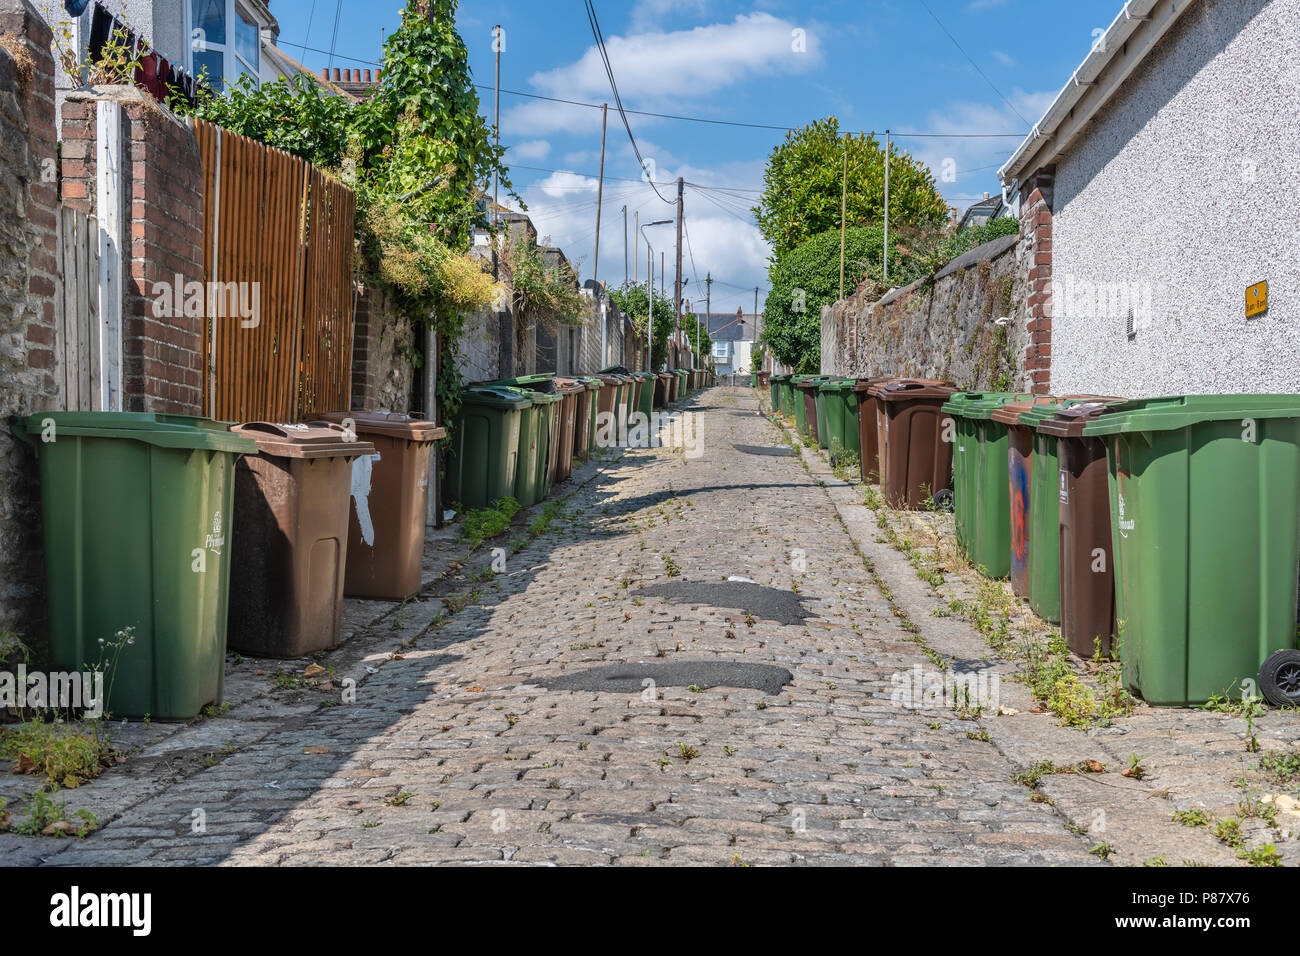 A row of Dustbins are lined up ready for collection in a rear backstreet in the city of Plymouth, Devon. Stock Photo